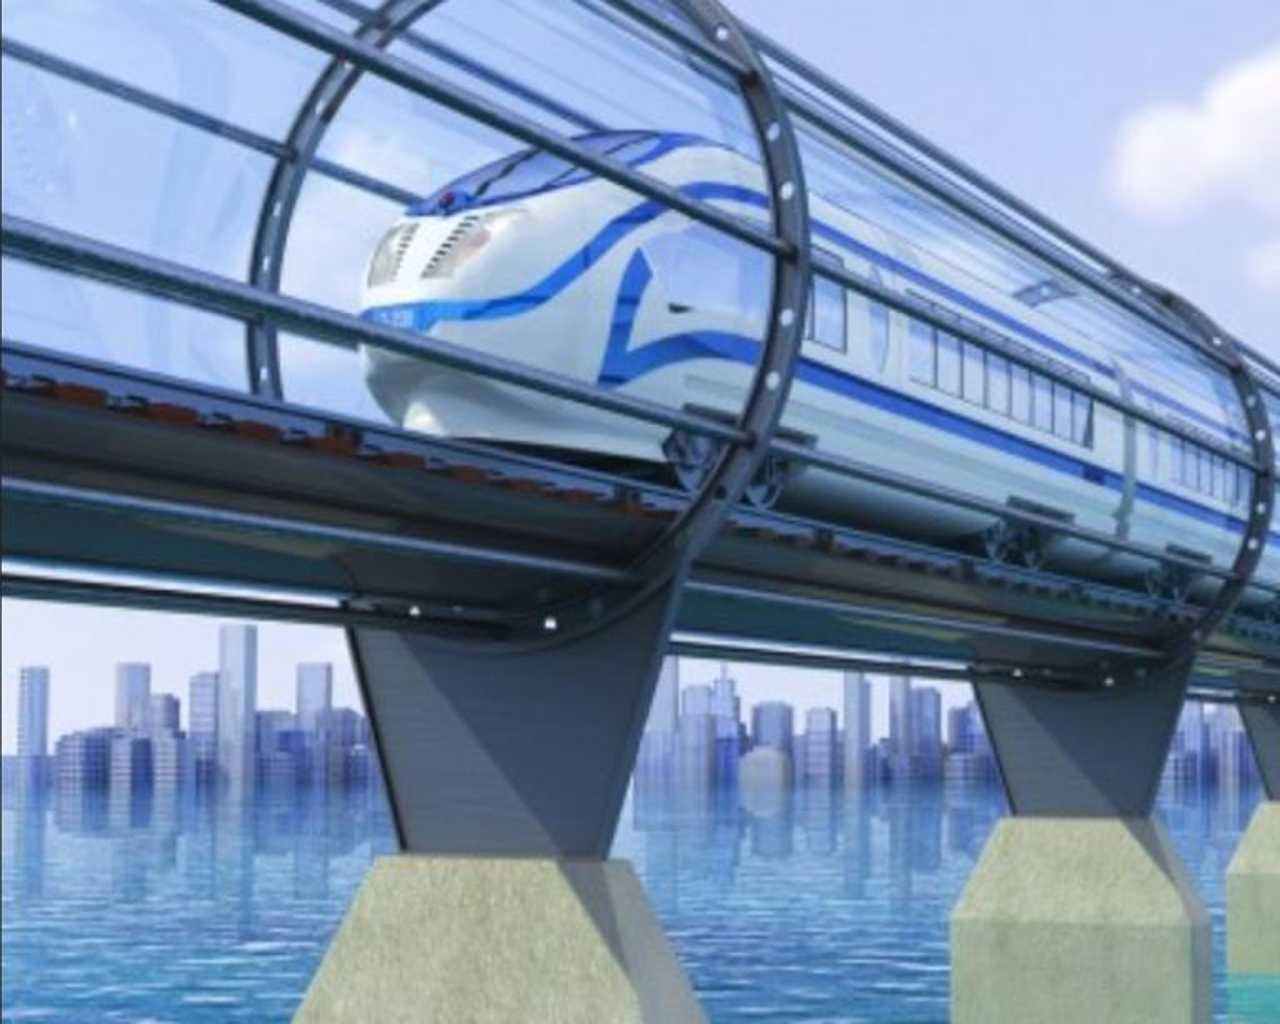 DP World to study ‘hyperloop’ container transport